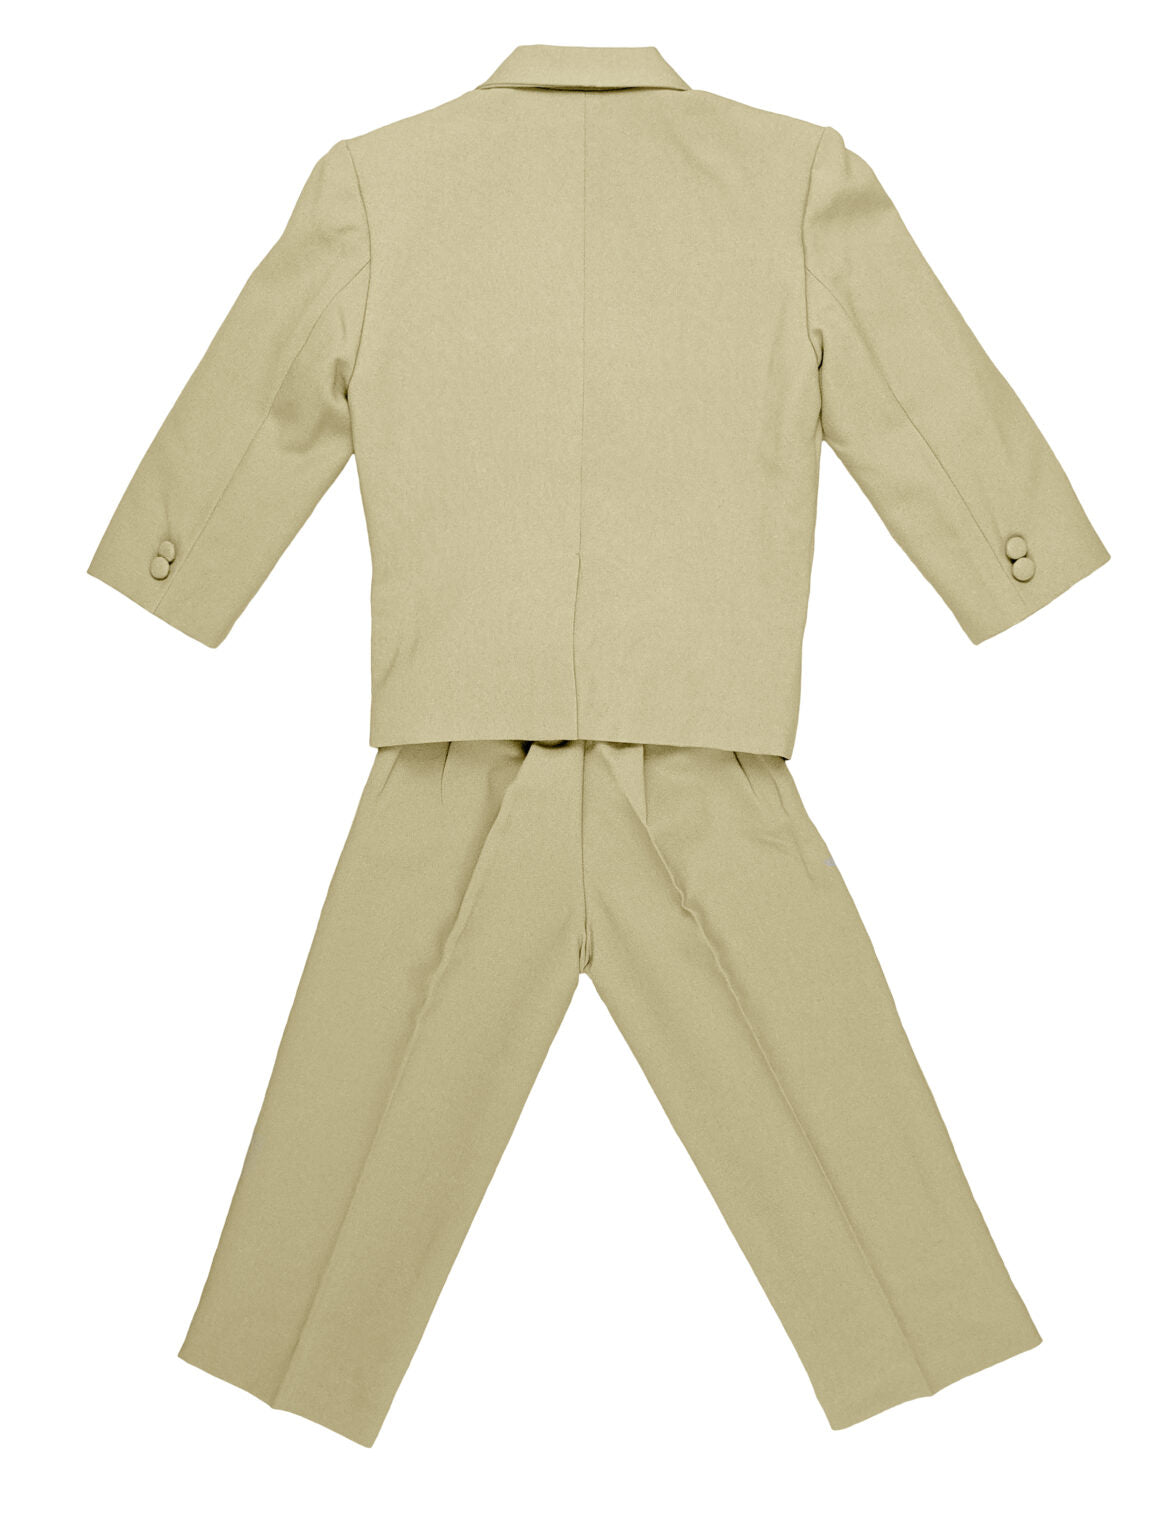 Boys Formal 5 Piece Suit with Shirt and Vest – Khaki - AH-BY013